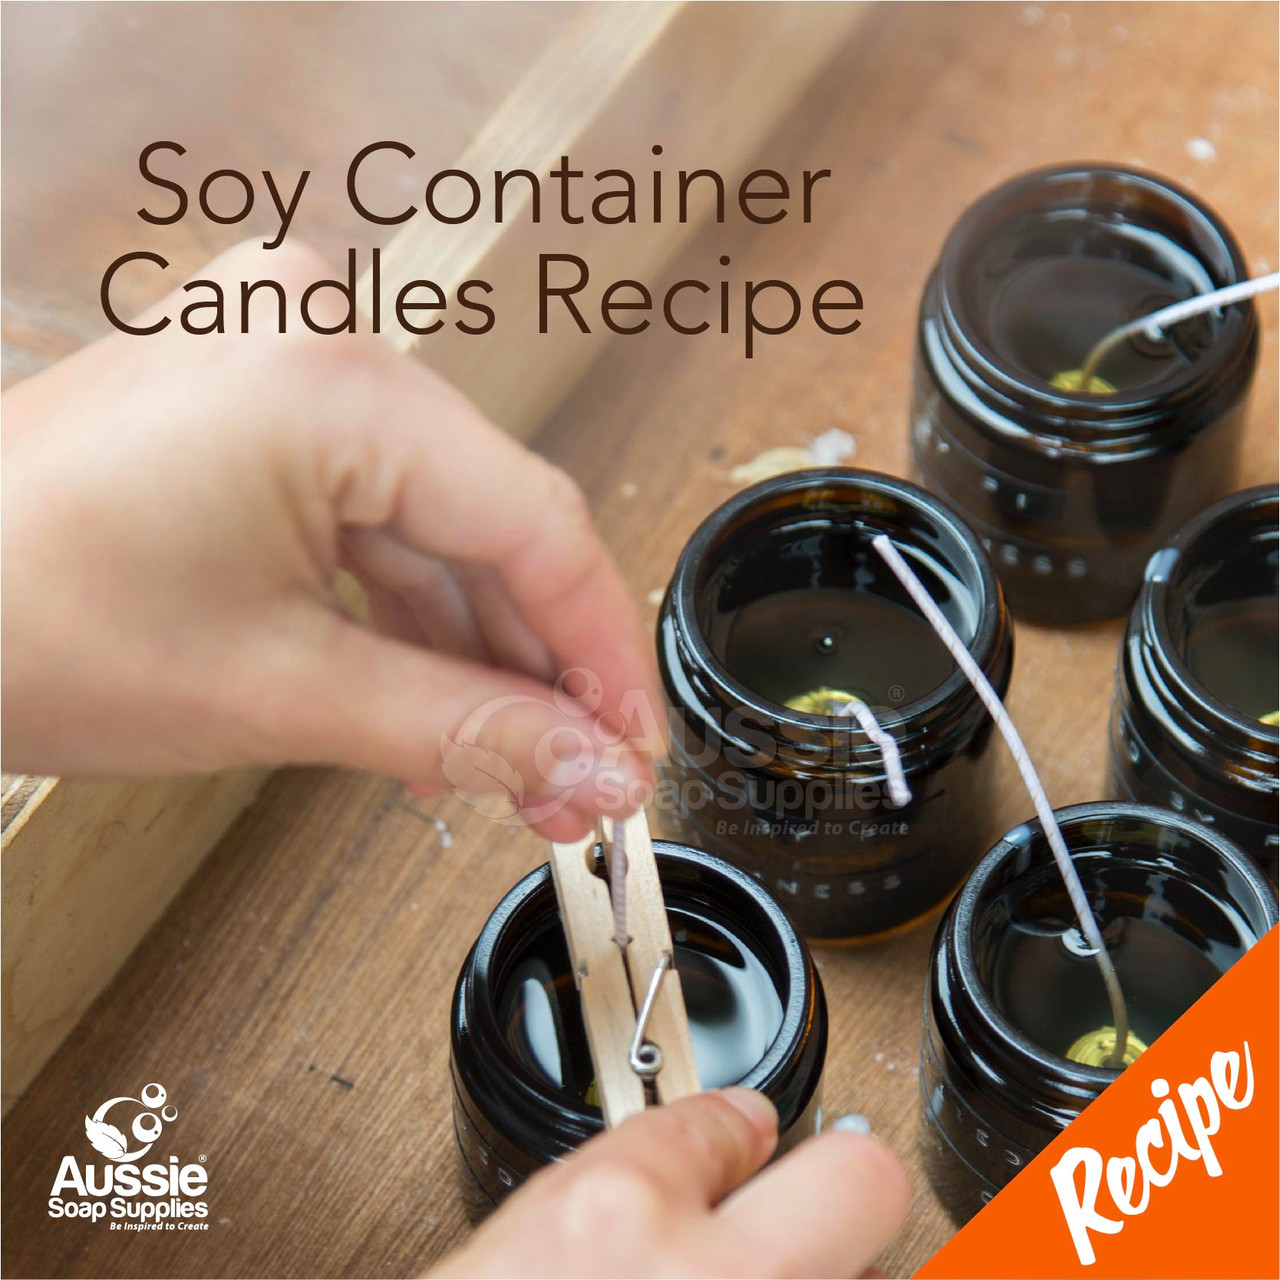 https://cdn11.bigcommerce.com/s-p6eiht9ezd/images/stencil/1280x1280/products/6343/16760/RF-HMSCC_How_to_Make_Soy_Container_Candles_A__95333.1685510195.jpg?c=1